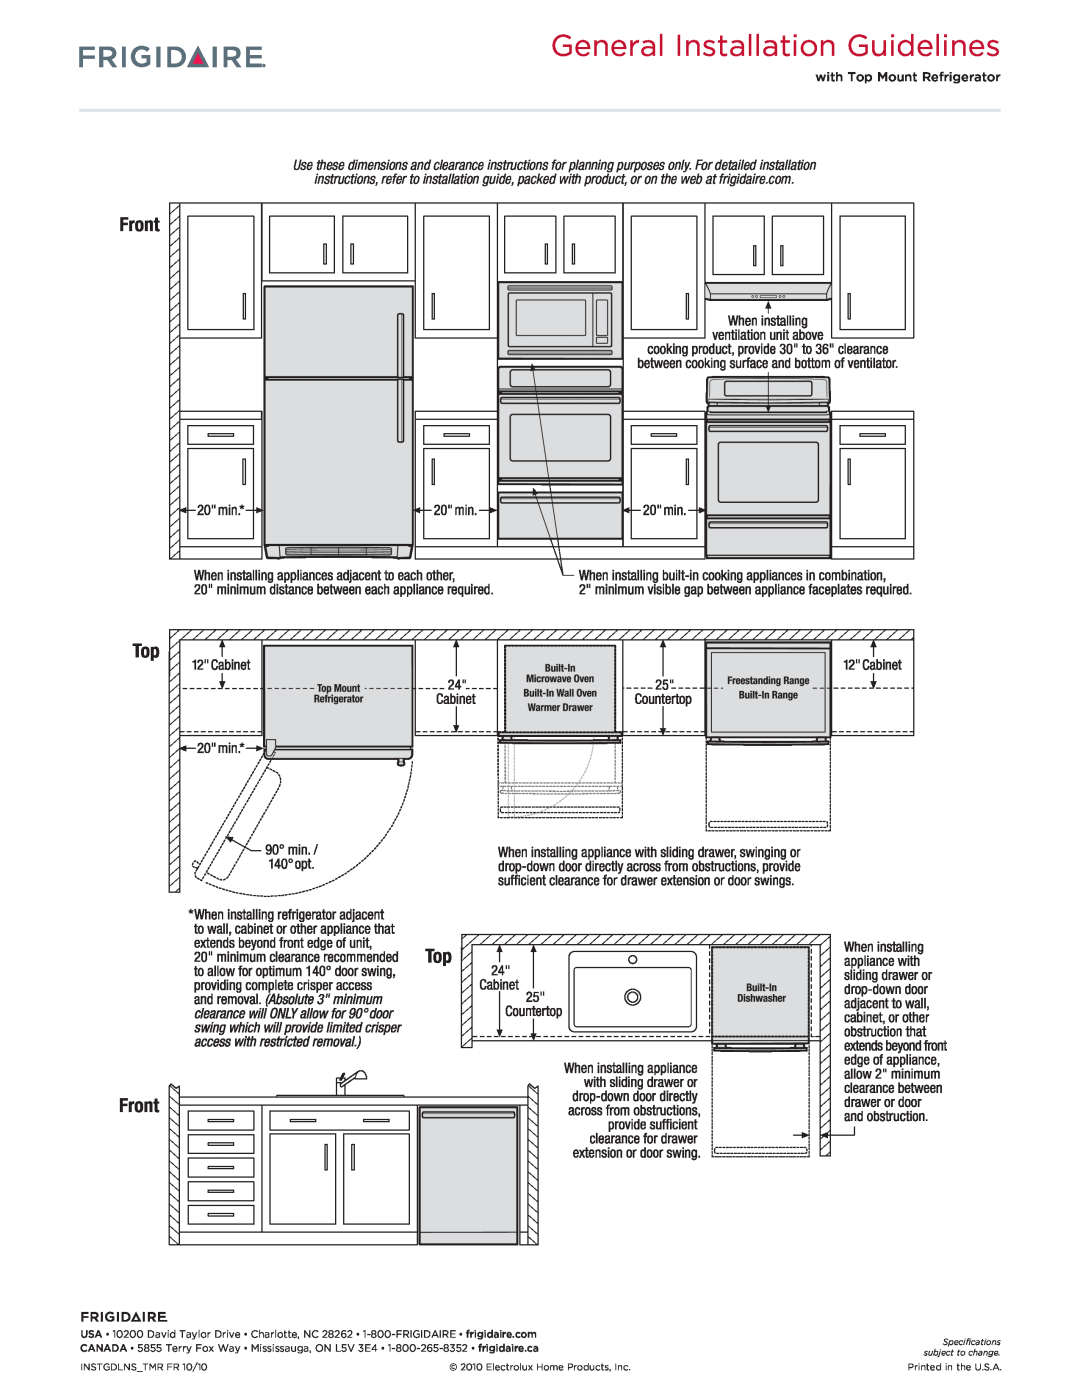 Frigidaire FFHT2117L dimensions General Installation Guidelines, Top Front 